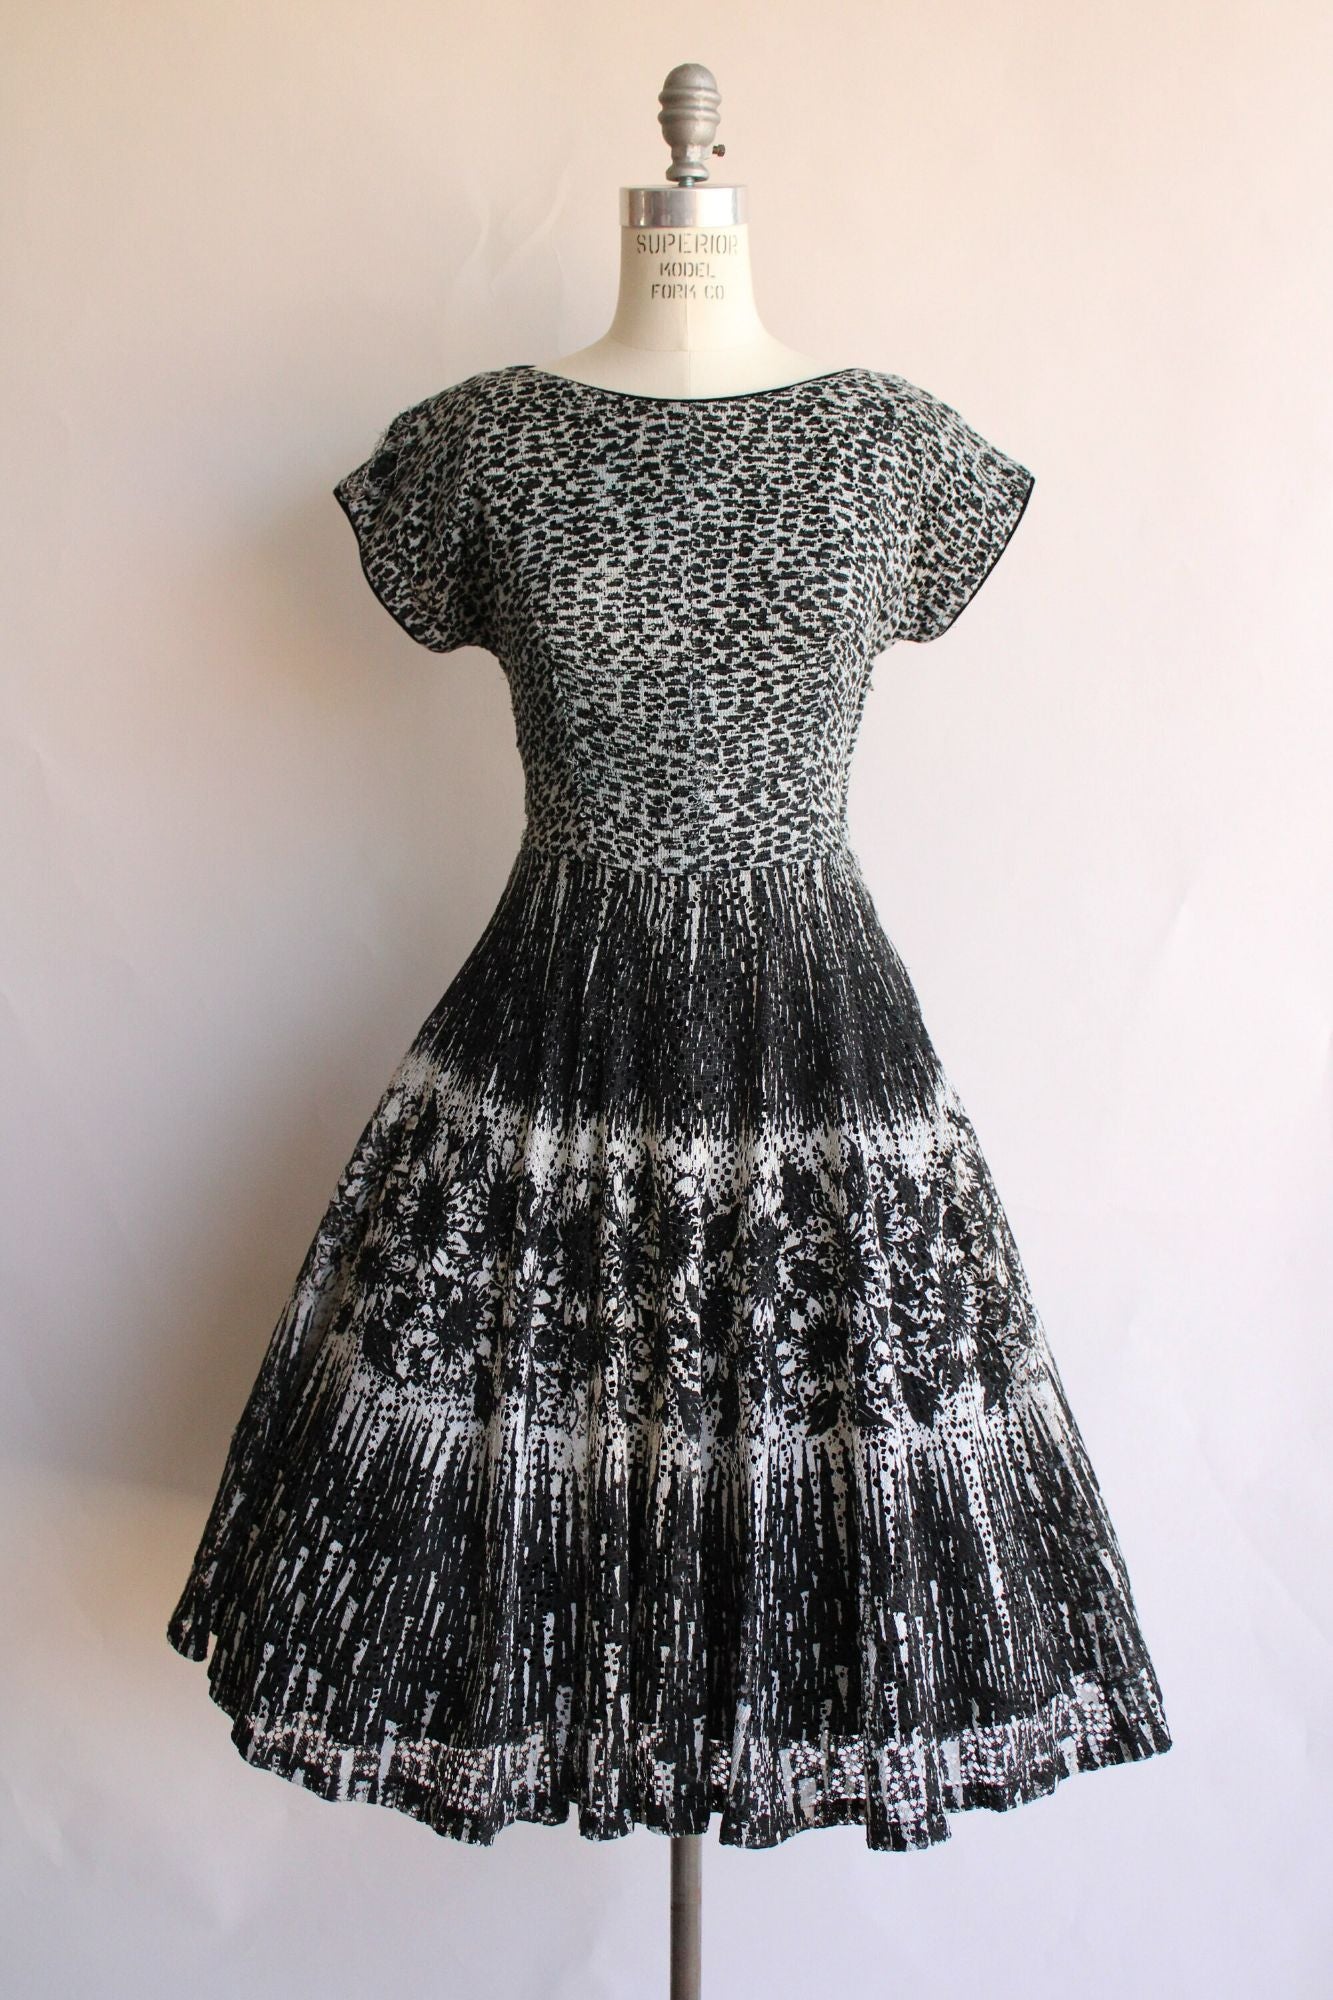 Vintage 1950s Black and White Open Lace Dress